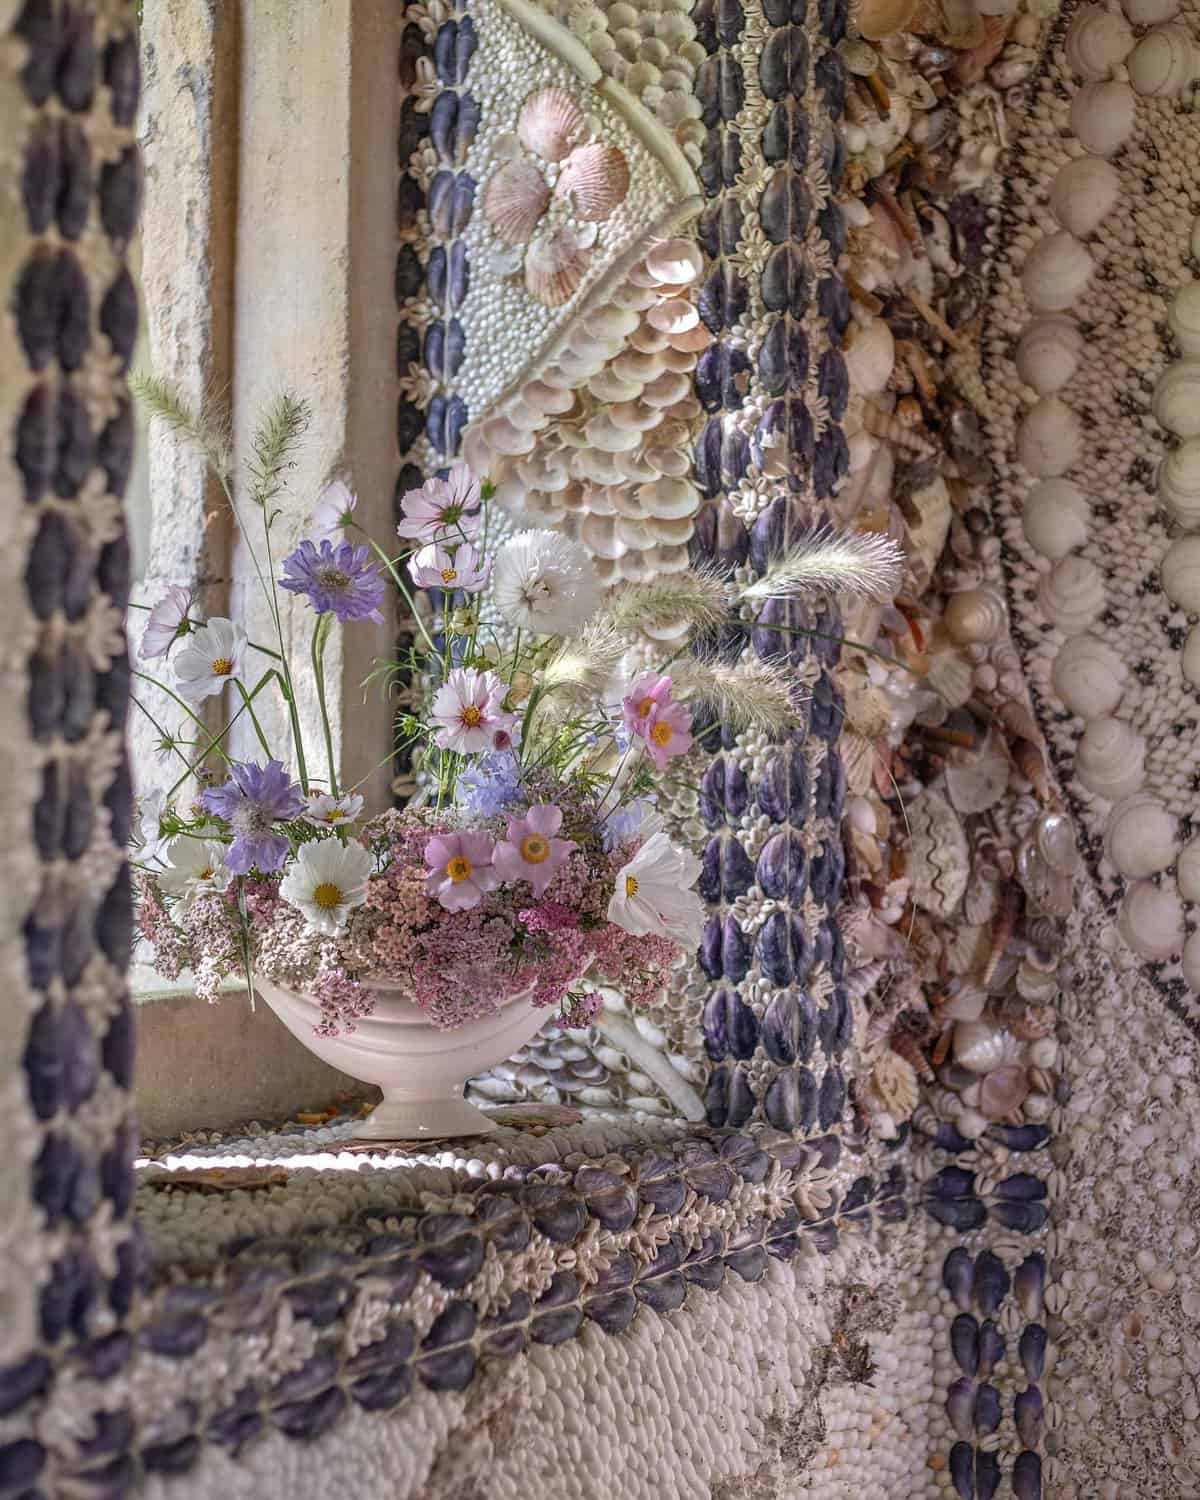 A bowl of flowers sits on a window sill in a shell house garden folly.